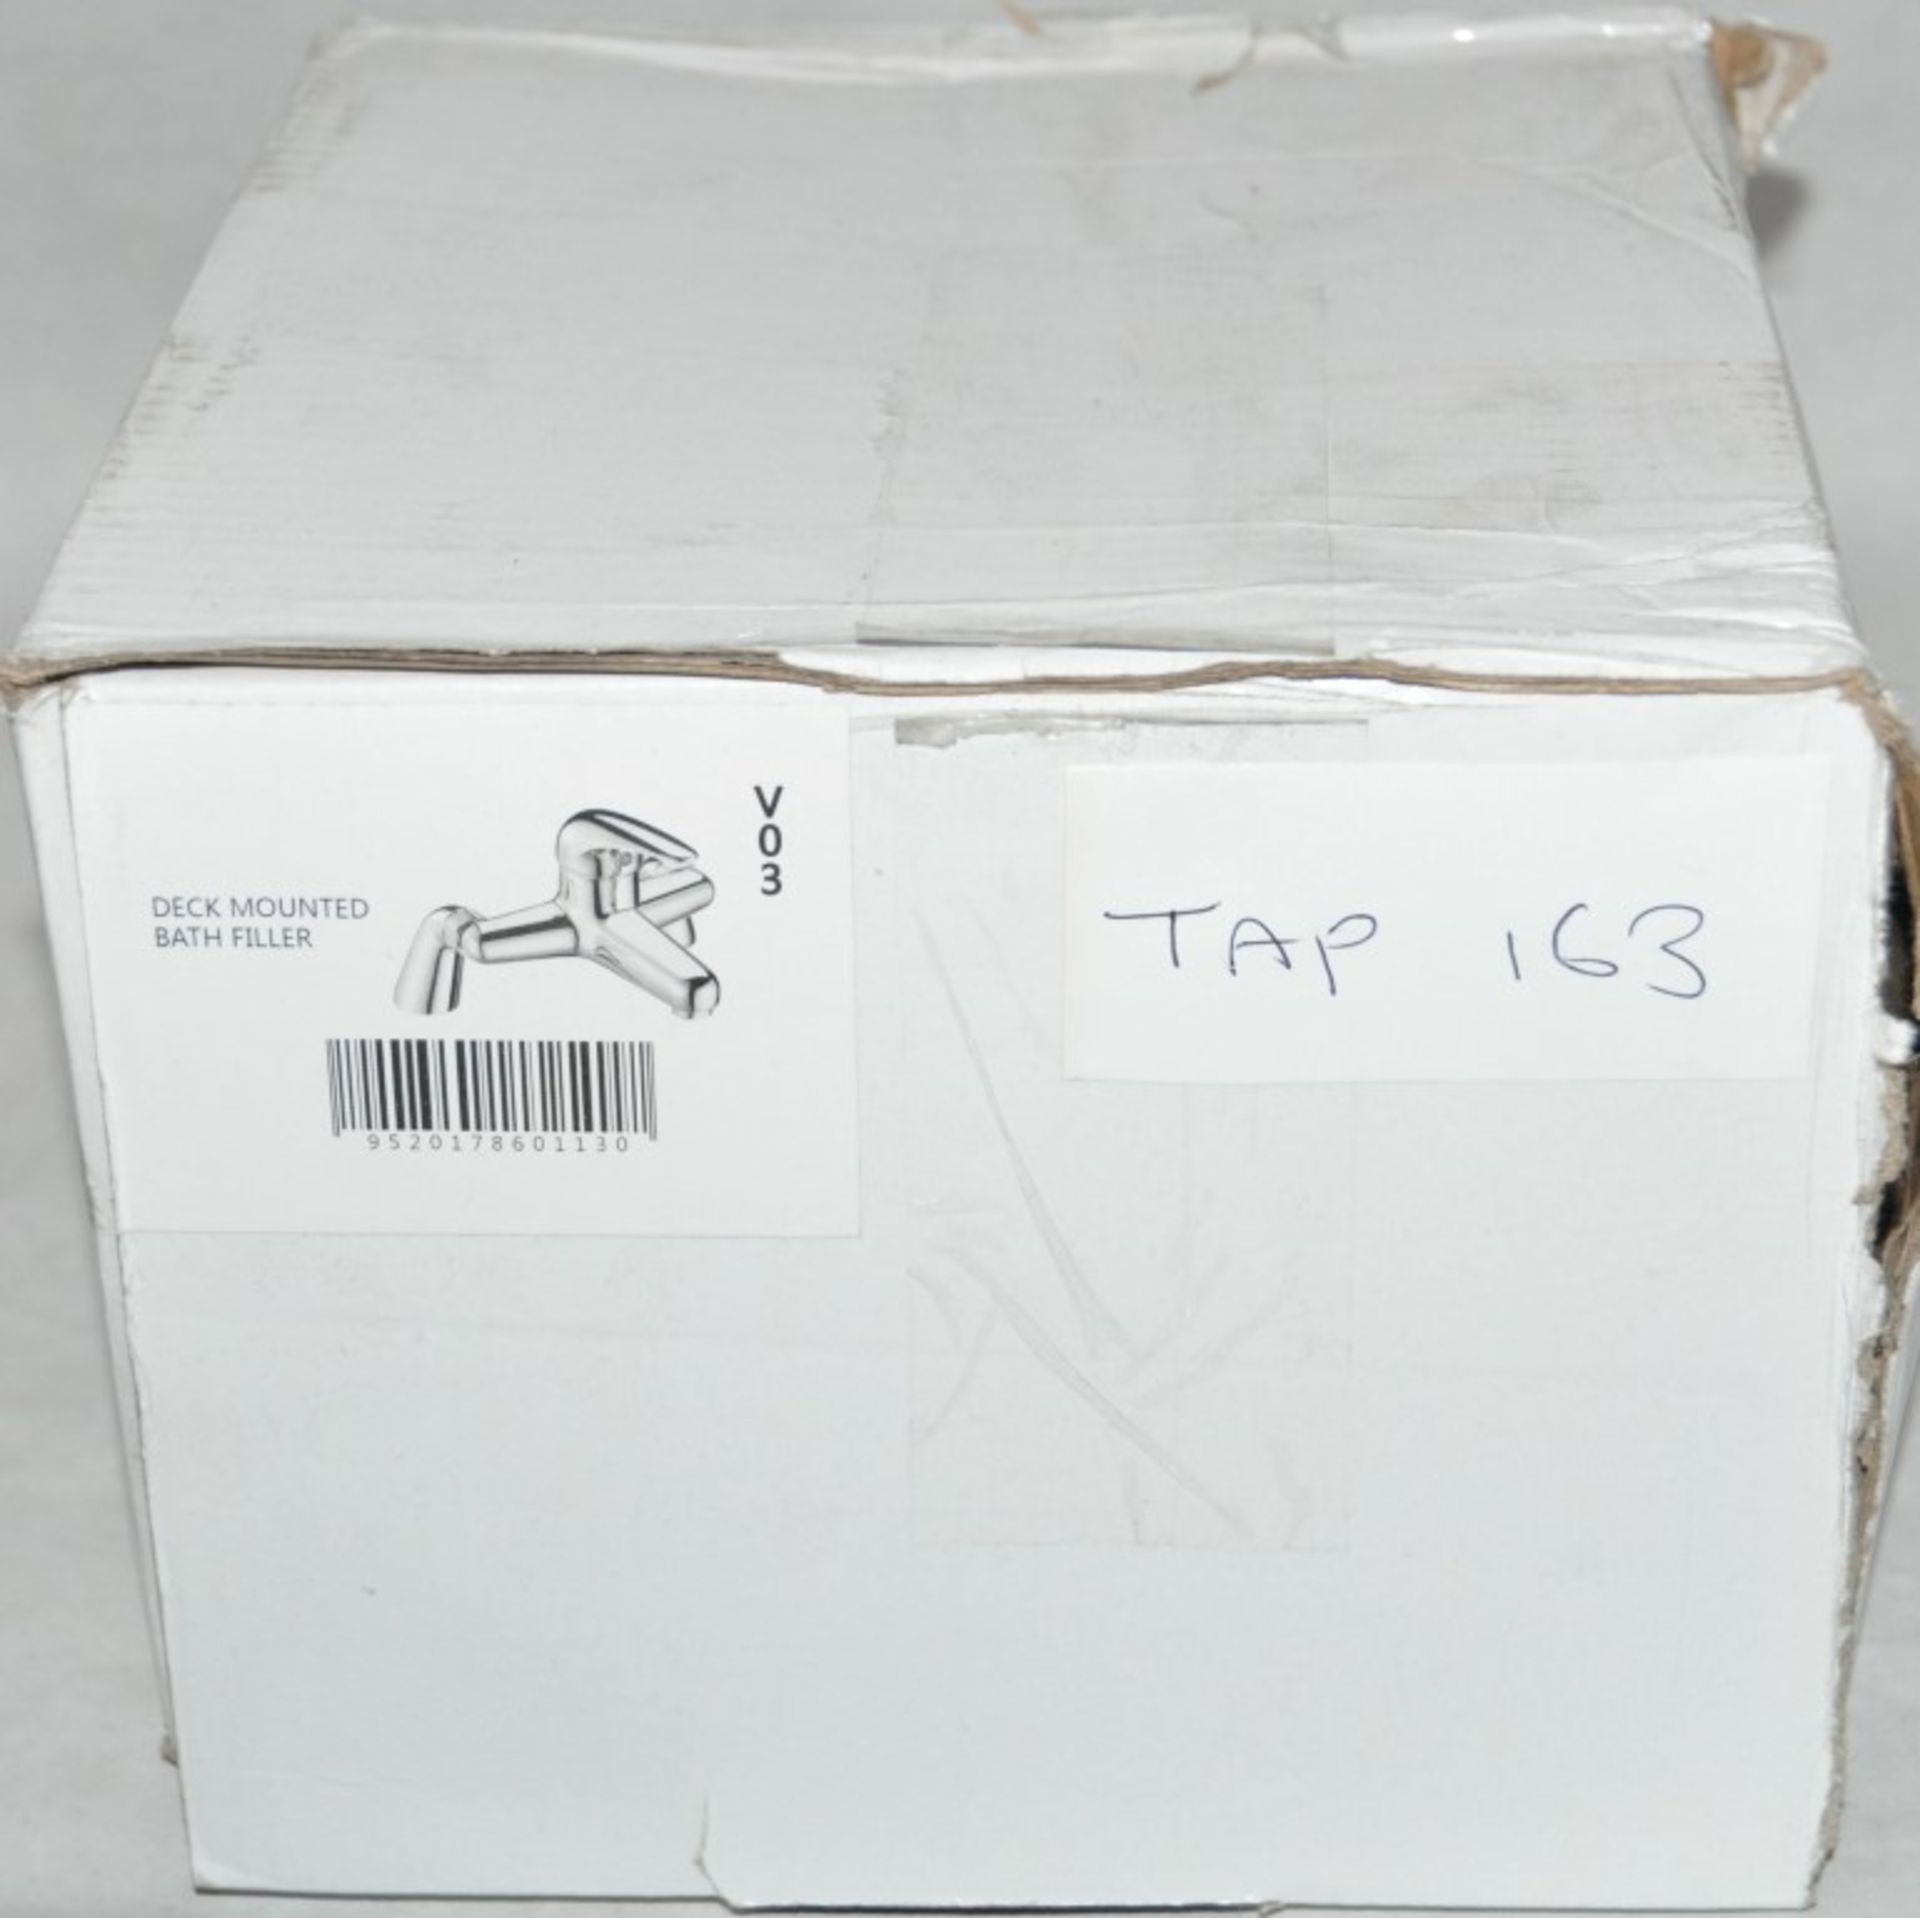 1 x Chrome Bath Filler – Used Commercial Samples - Boxed in Good Condition – Complete – Model : - Image 3 of 4